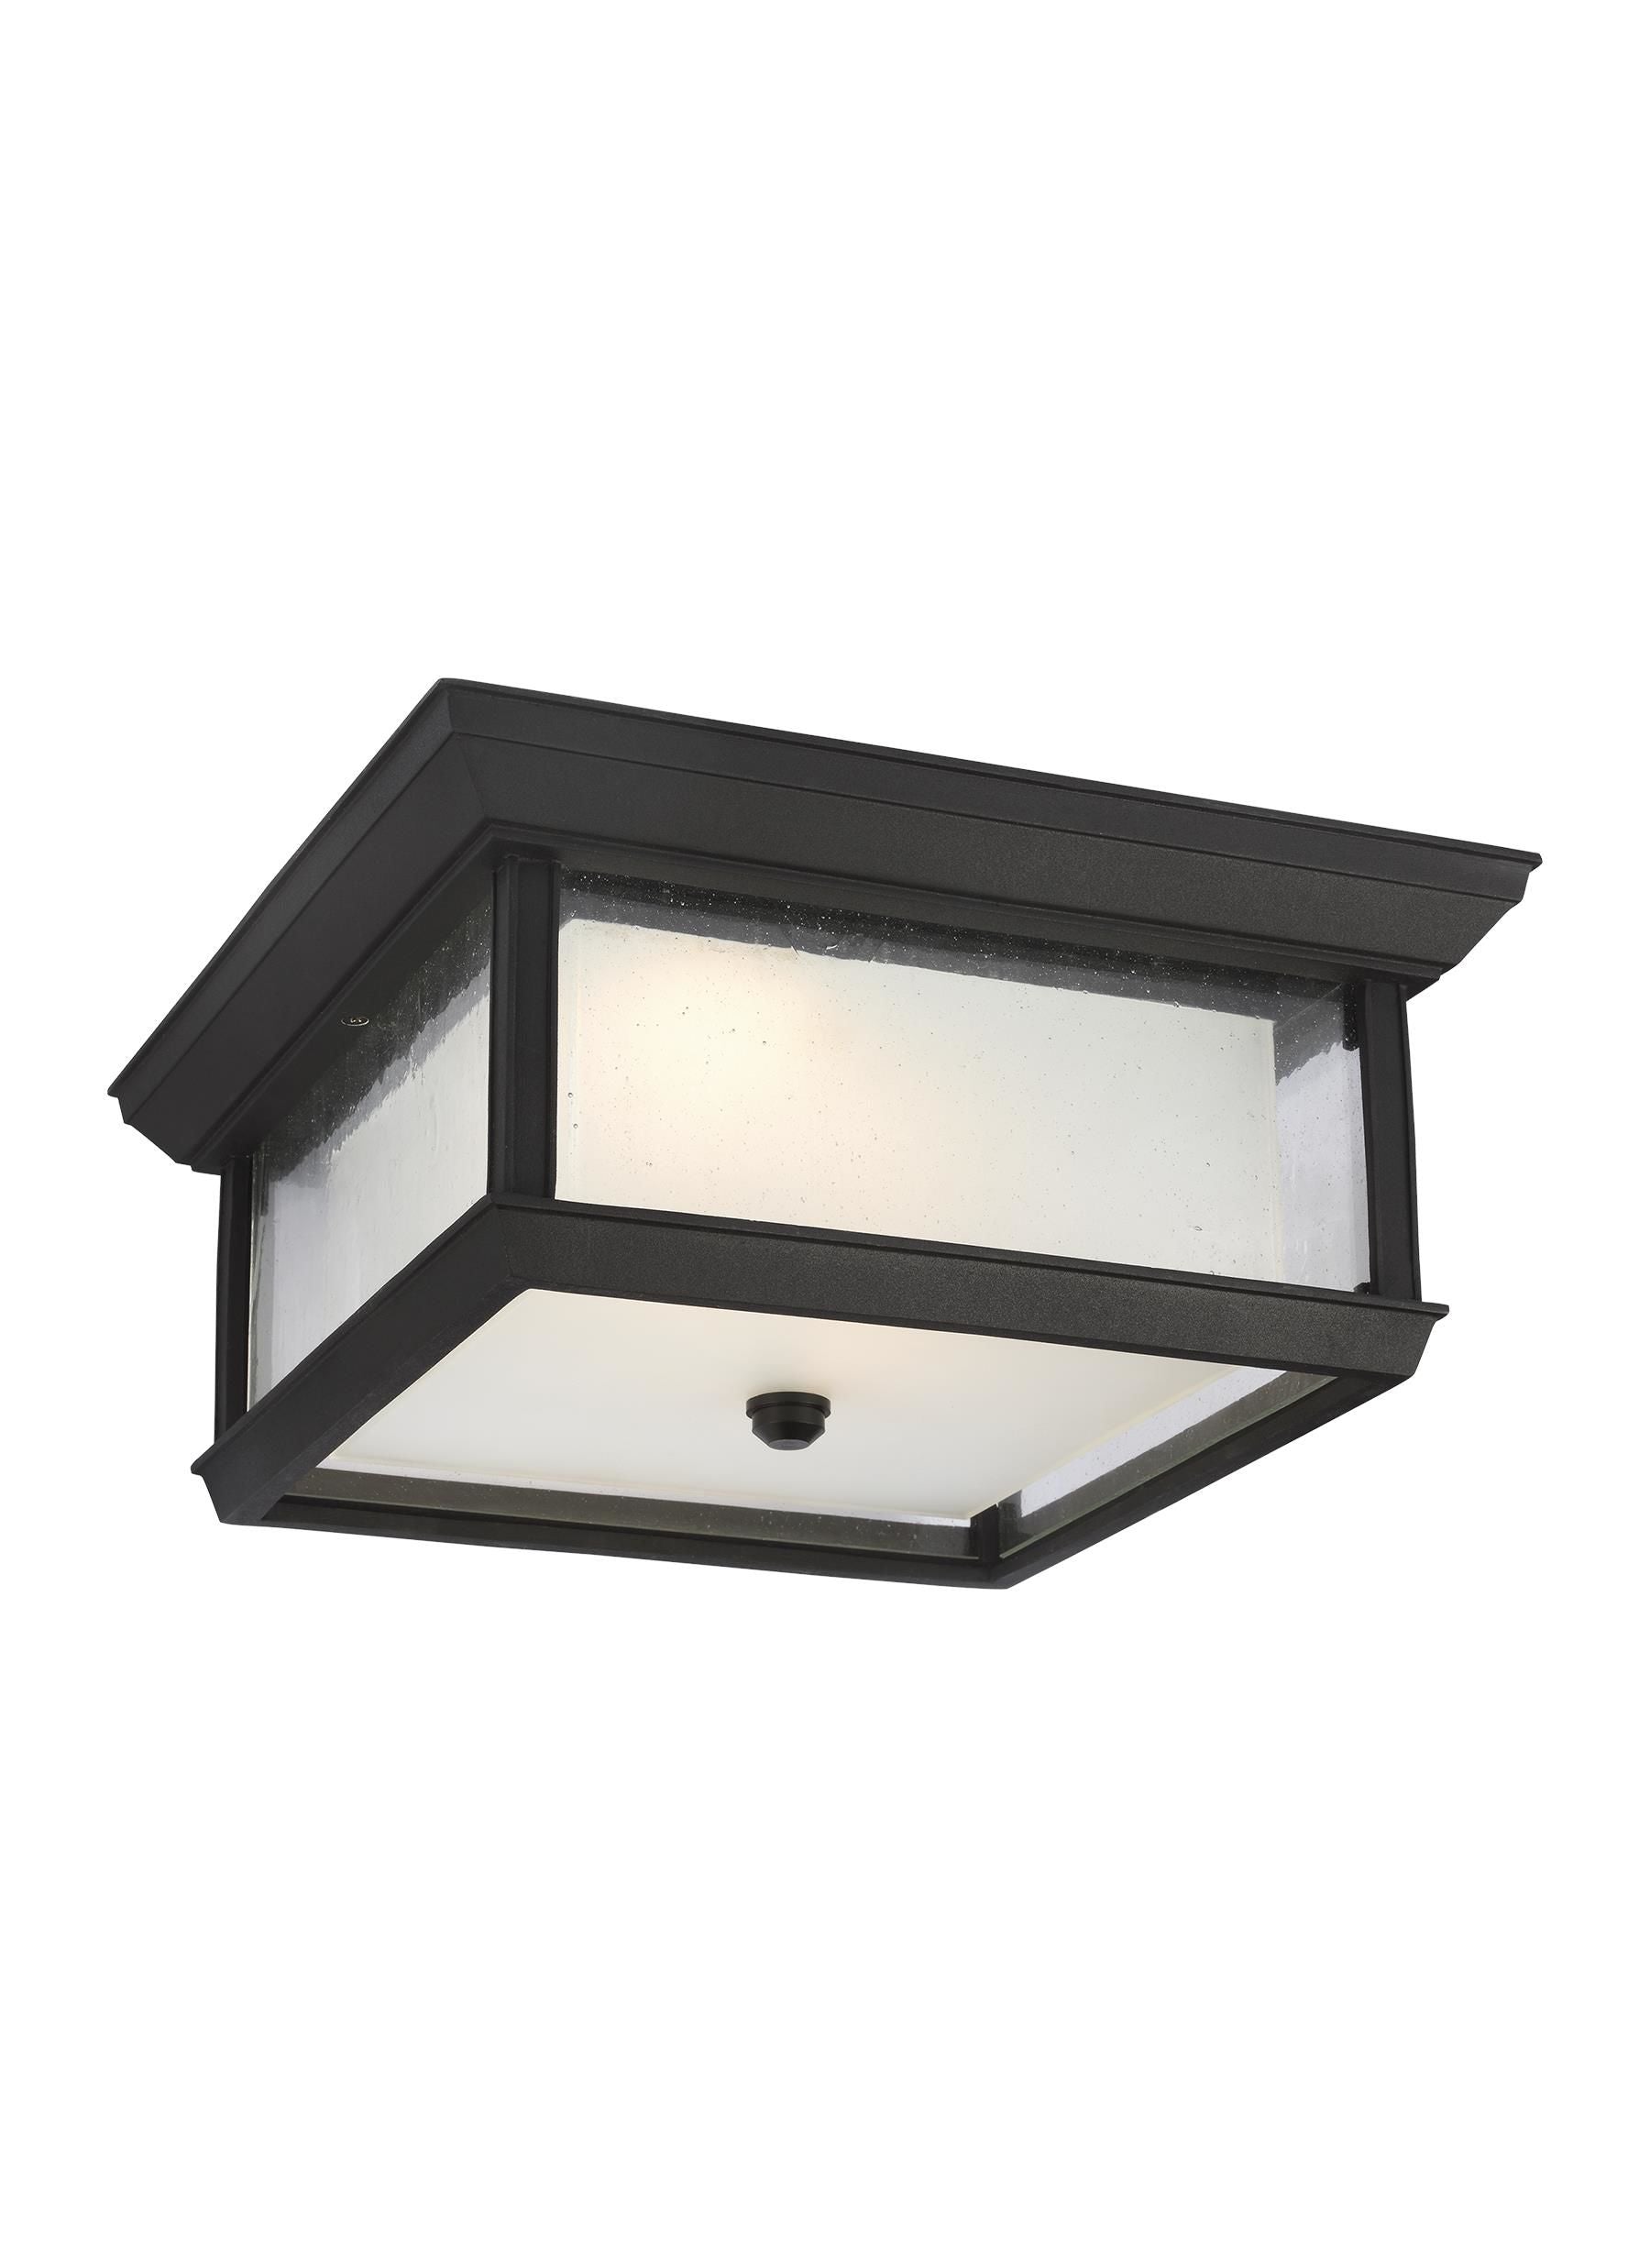 McHenry Outdoor flush mount Black INTEGRATED LED - OL12813TXB-L1 | FEISS